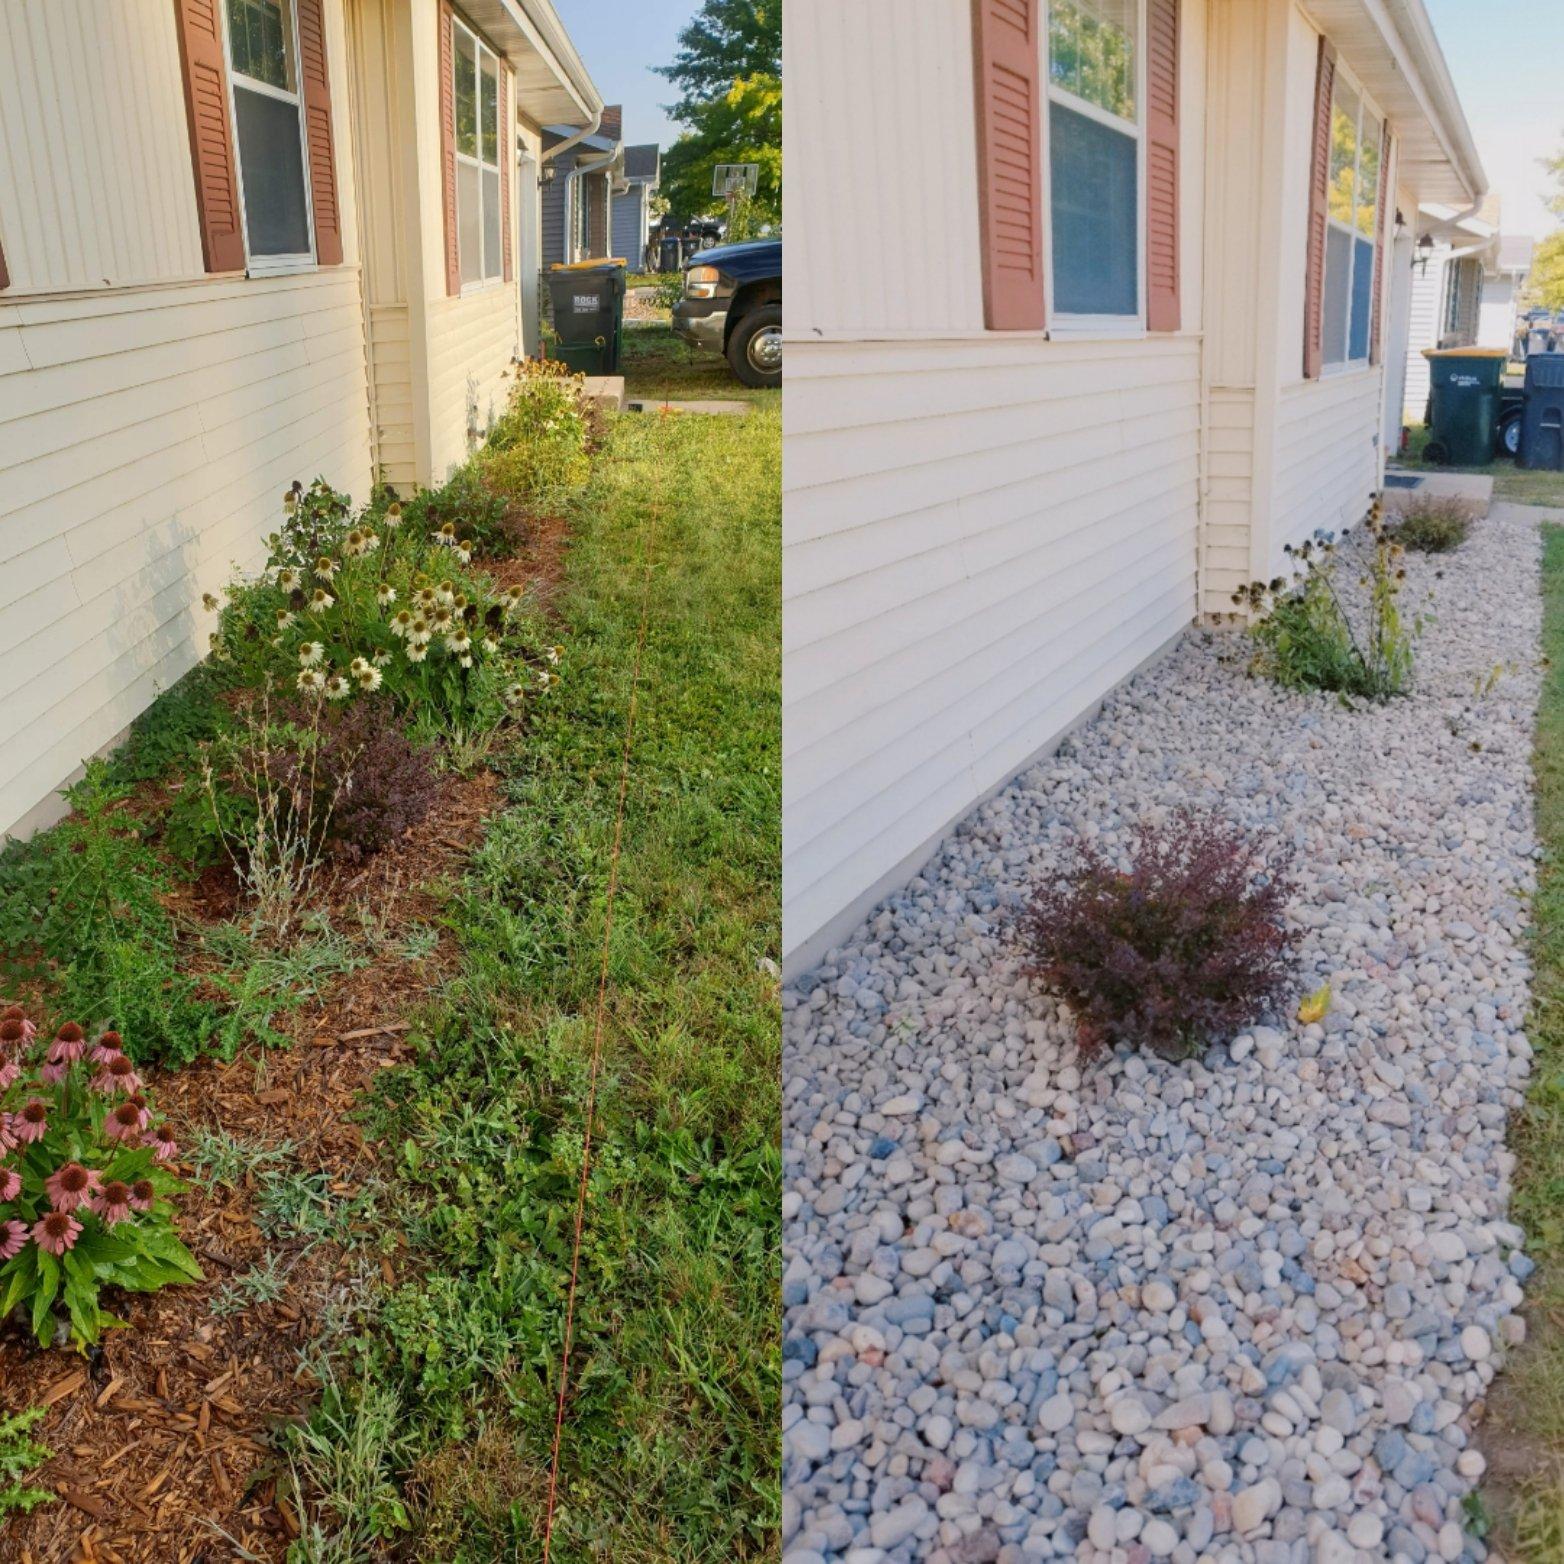 Quality landscaping and hardscaping work by our skilled specialists